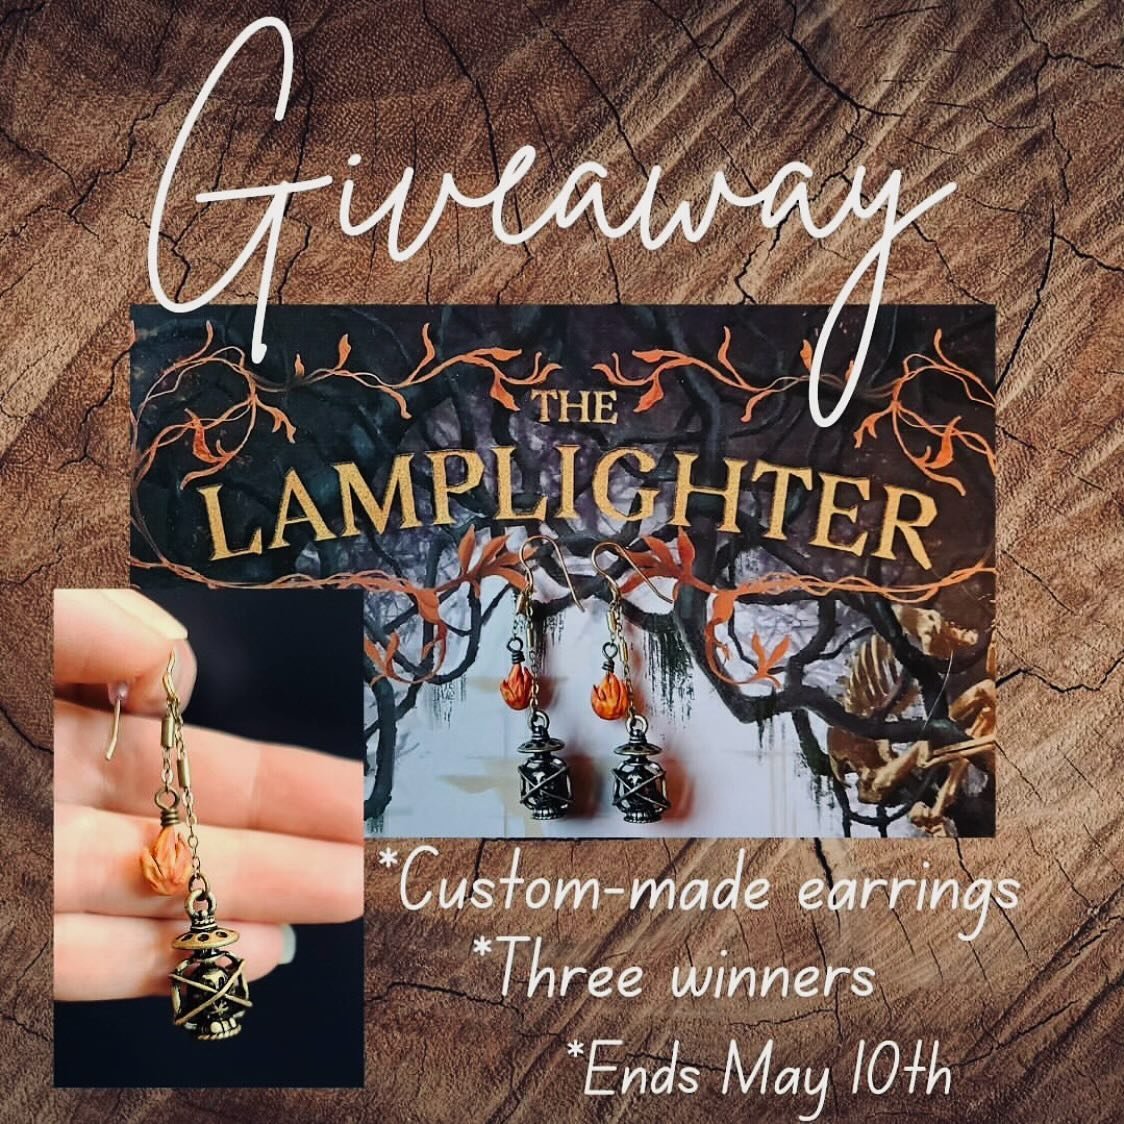 📚‼️AHH 😱 I am so grateful to have gotten to design and make these earrings to celebrate my dear friend @crystaljbell and her debut novel, THE LAMPLIGHTER &mdash; a YA horror book that comes out May 21st!!

~~~

Crystal is one of the first author fr